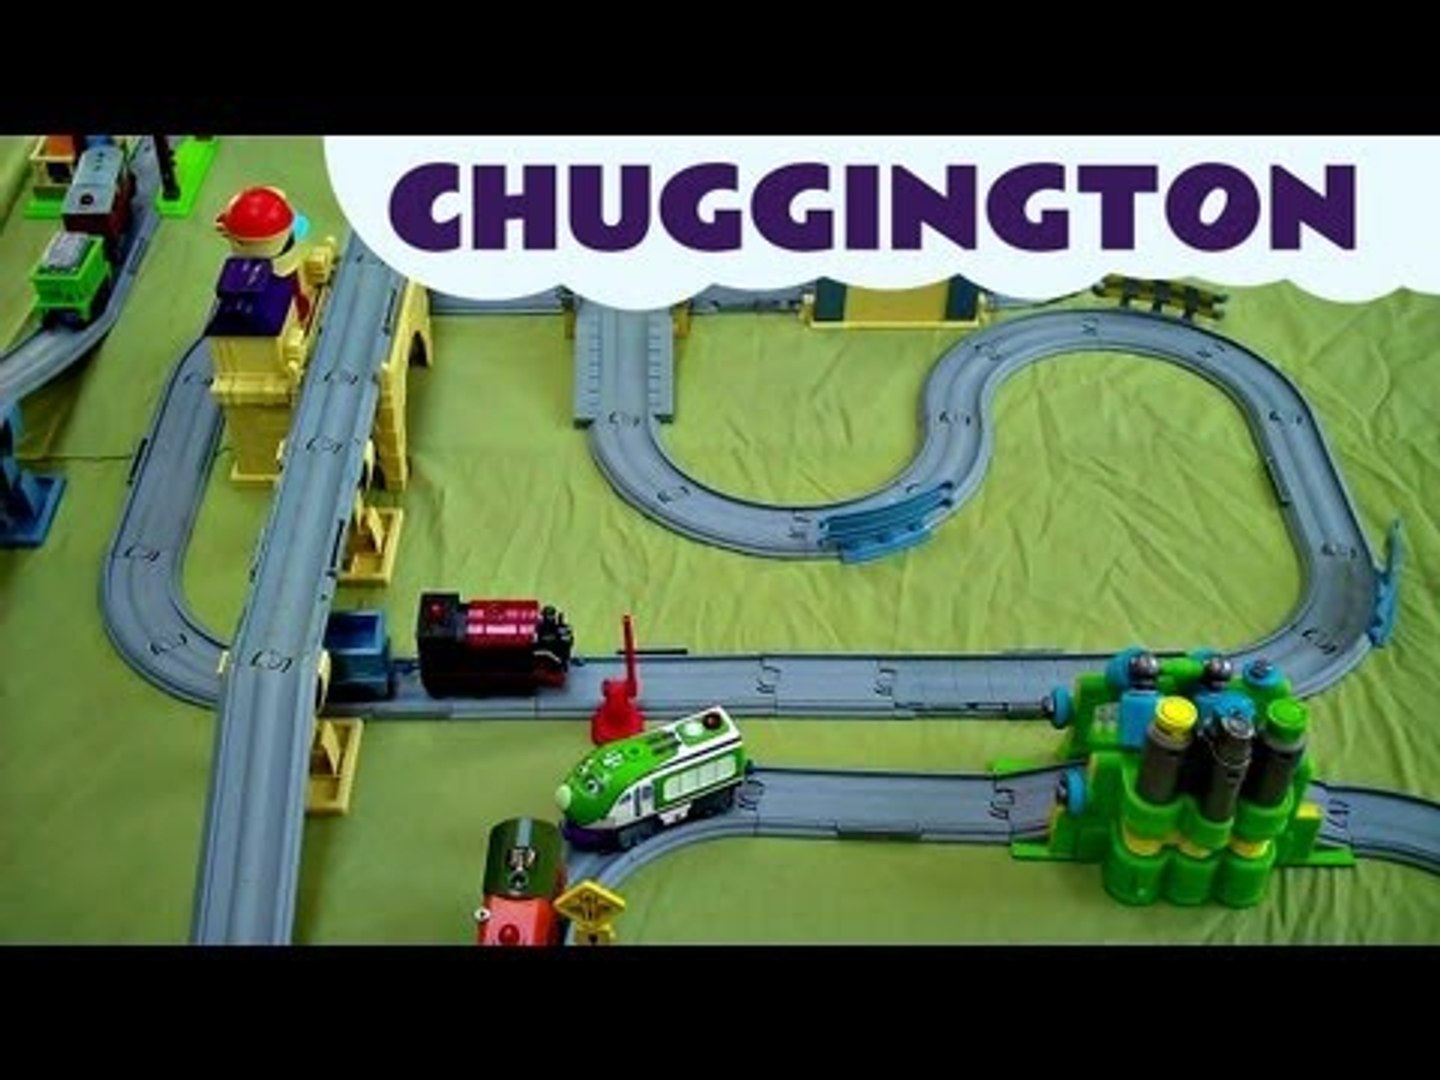 Chuggington 5 Transforming Train Toy Birthday Gift for Preschool Kids Age 3 and Up Fun for 3 4 5 Year Old Boys and Girls Pop and Transform Chuggers – Brewster Free-Rolling Wheels 